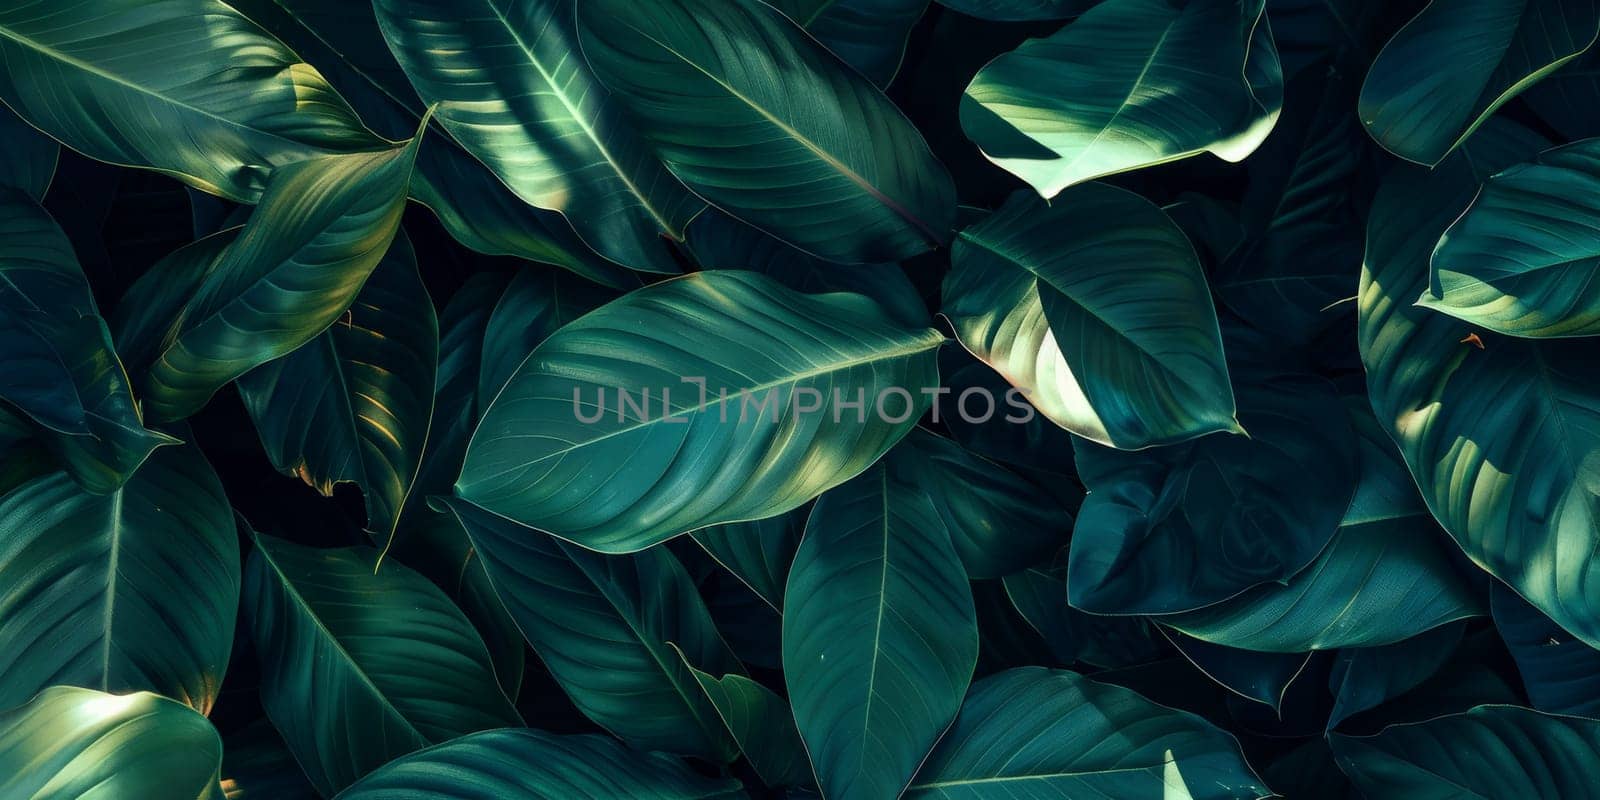 Detailed view of multiple fresh green leaves up close by Kadula